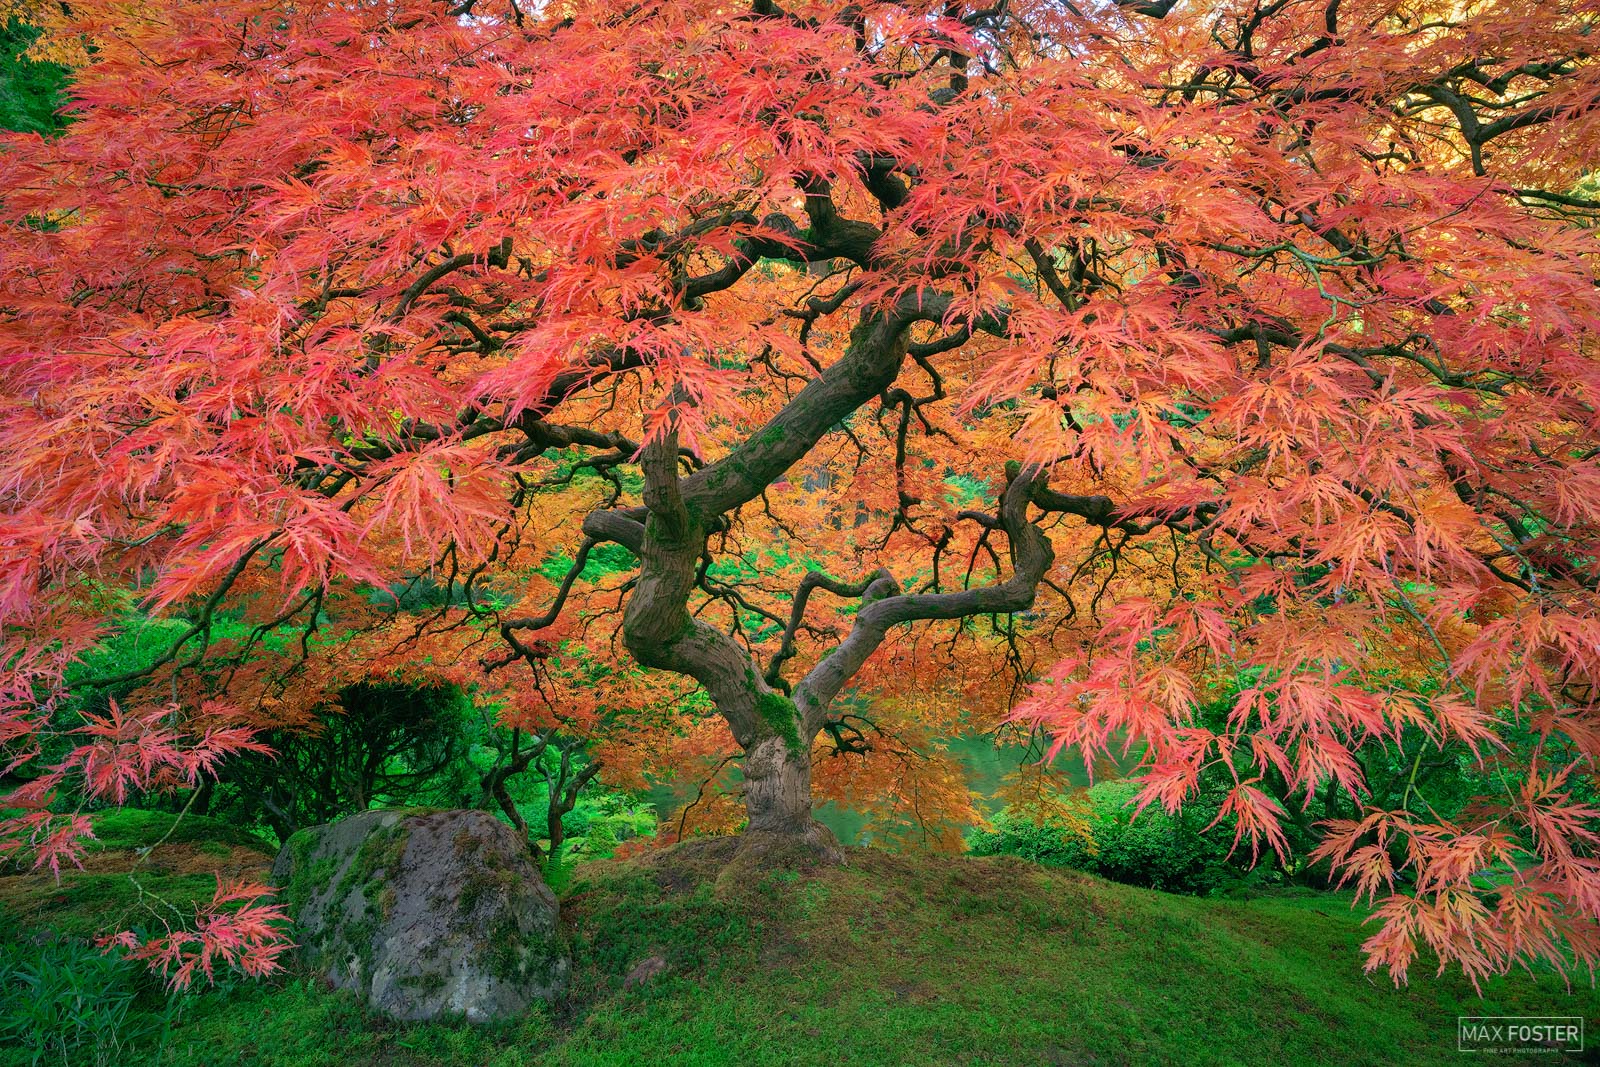 Refresh your space with Sunbrella, Max Foster's limited edition photography print of a Japanese Maple Tree in the Portland Japanese...